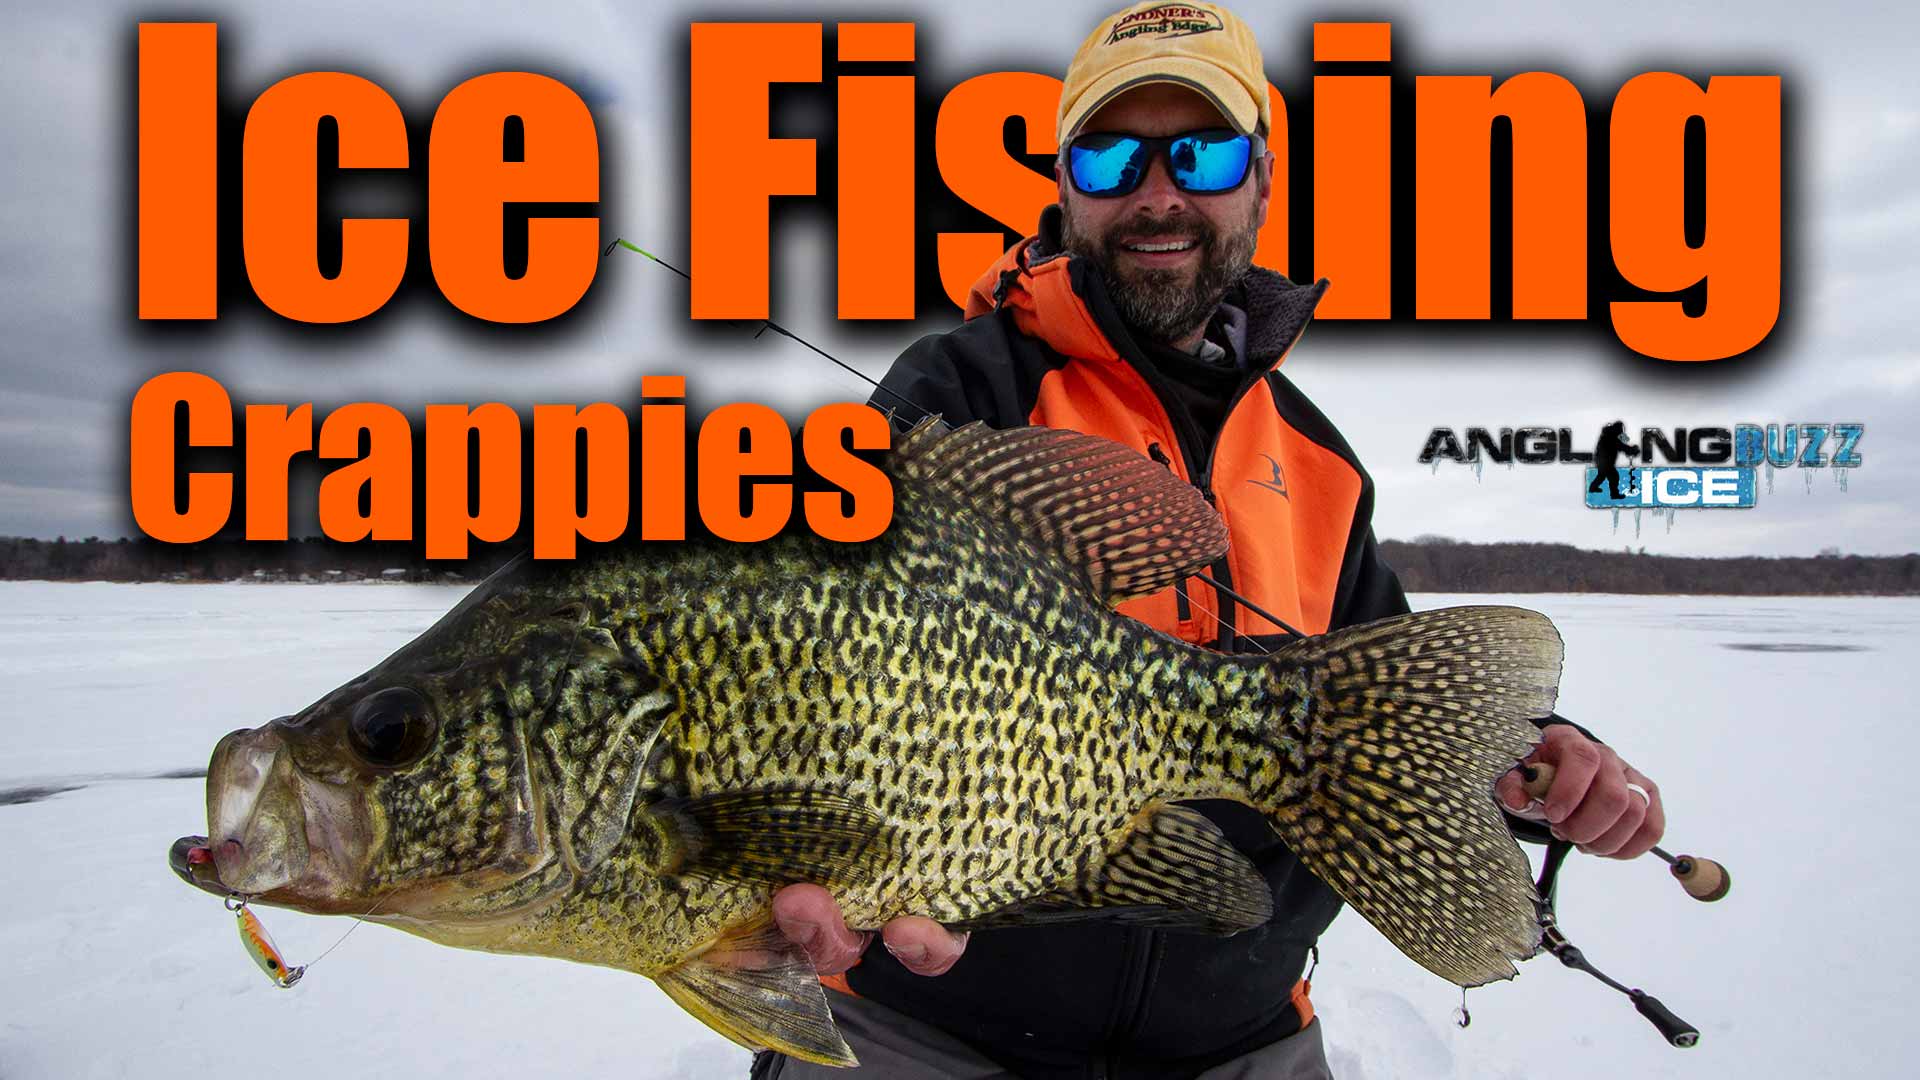 AnglingBuzz Ice Show 3: Ice Fishing Crappies